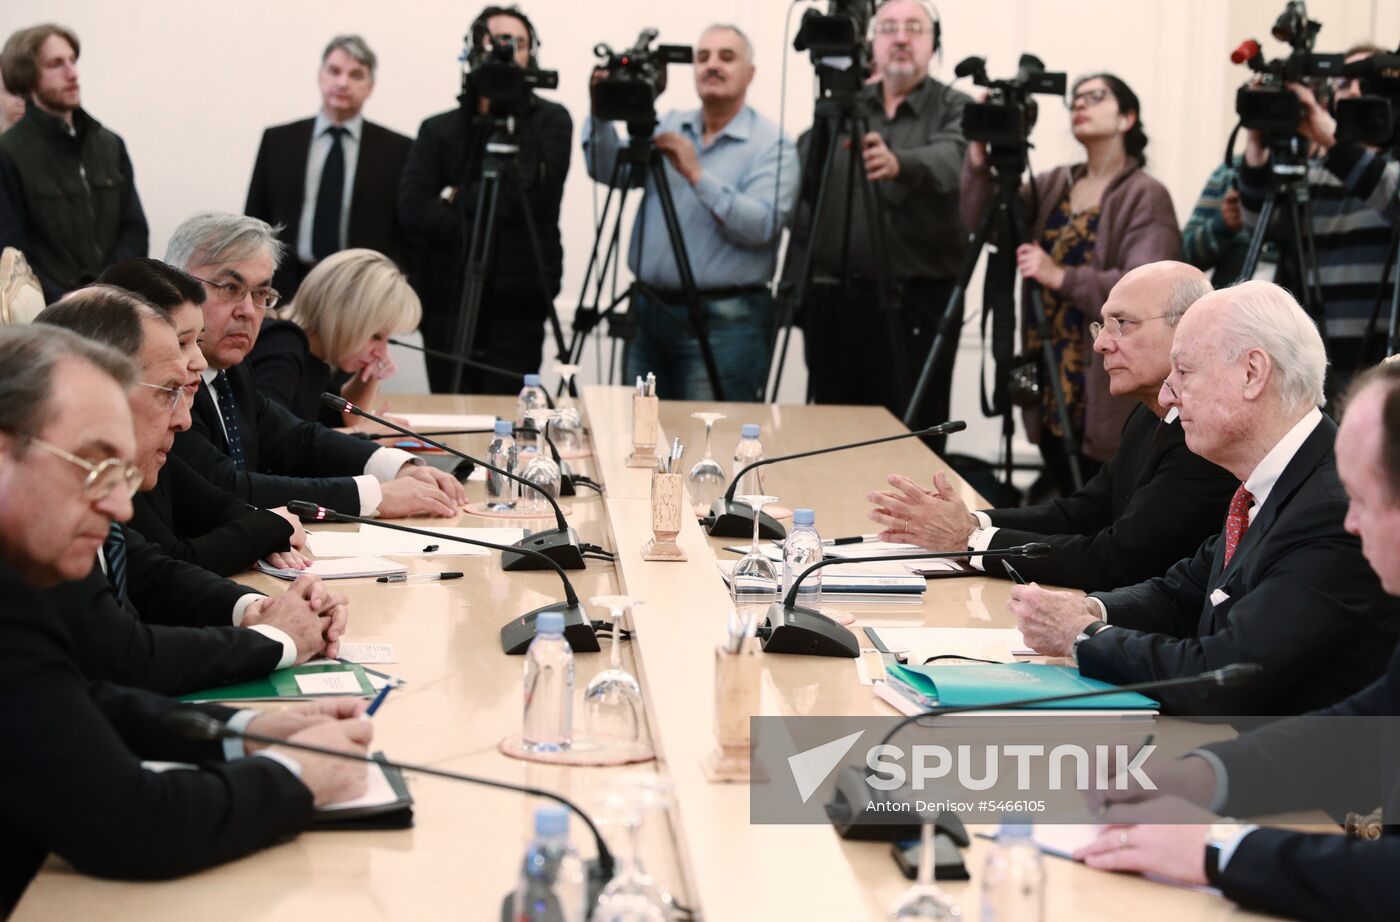 Foreign Minister Sergei Lavrov meets with UN Special Envoy for Syria Staffan de Mistura